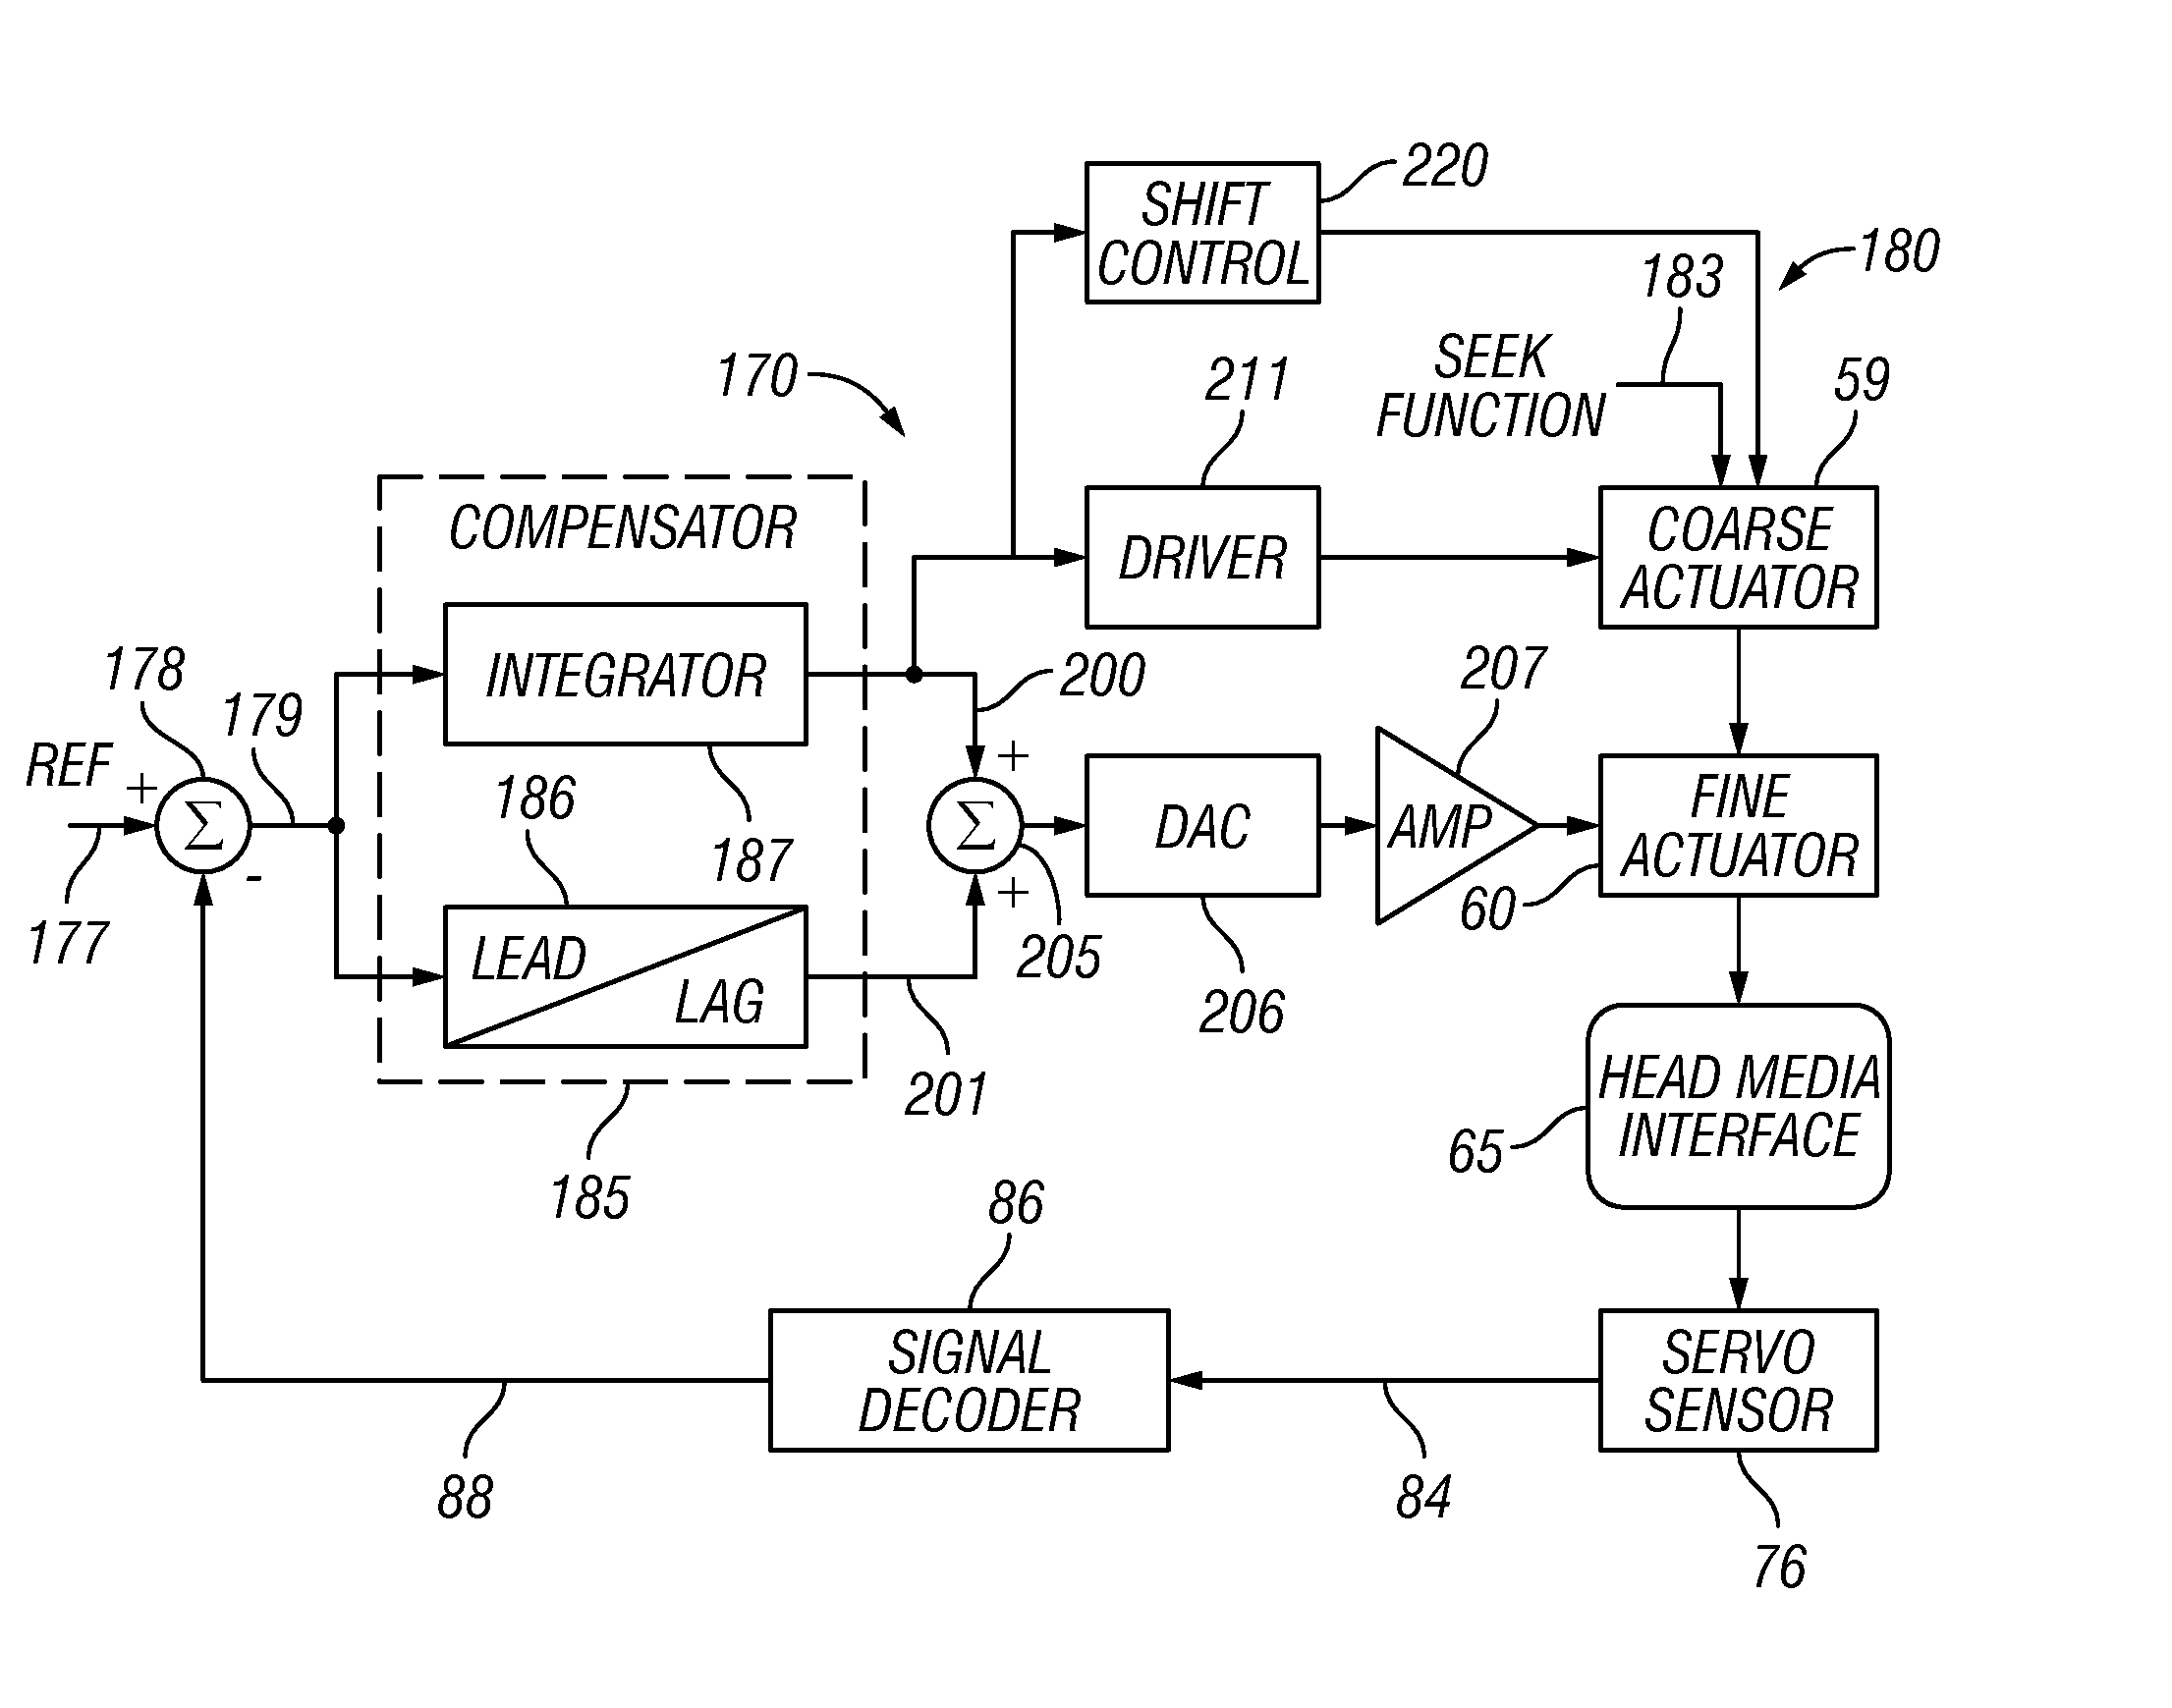 Positioning a coarse actuator of compound actuator tape servo system at midpoint of maximum peaks of lateral tape movement